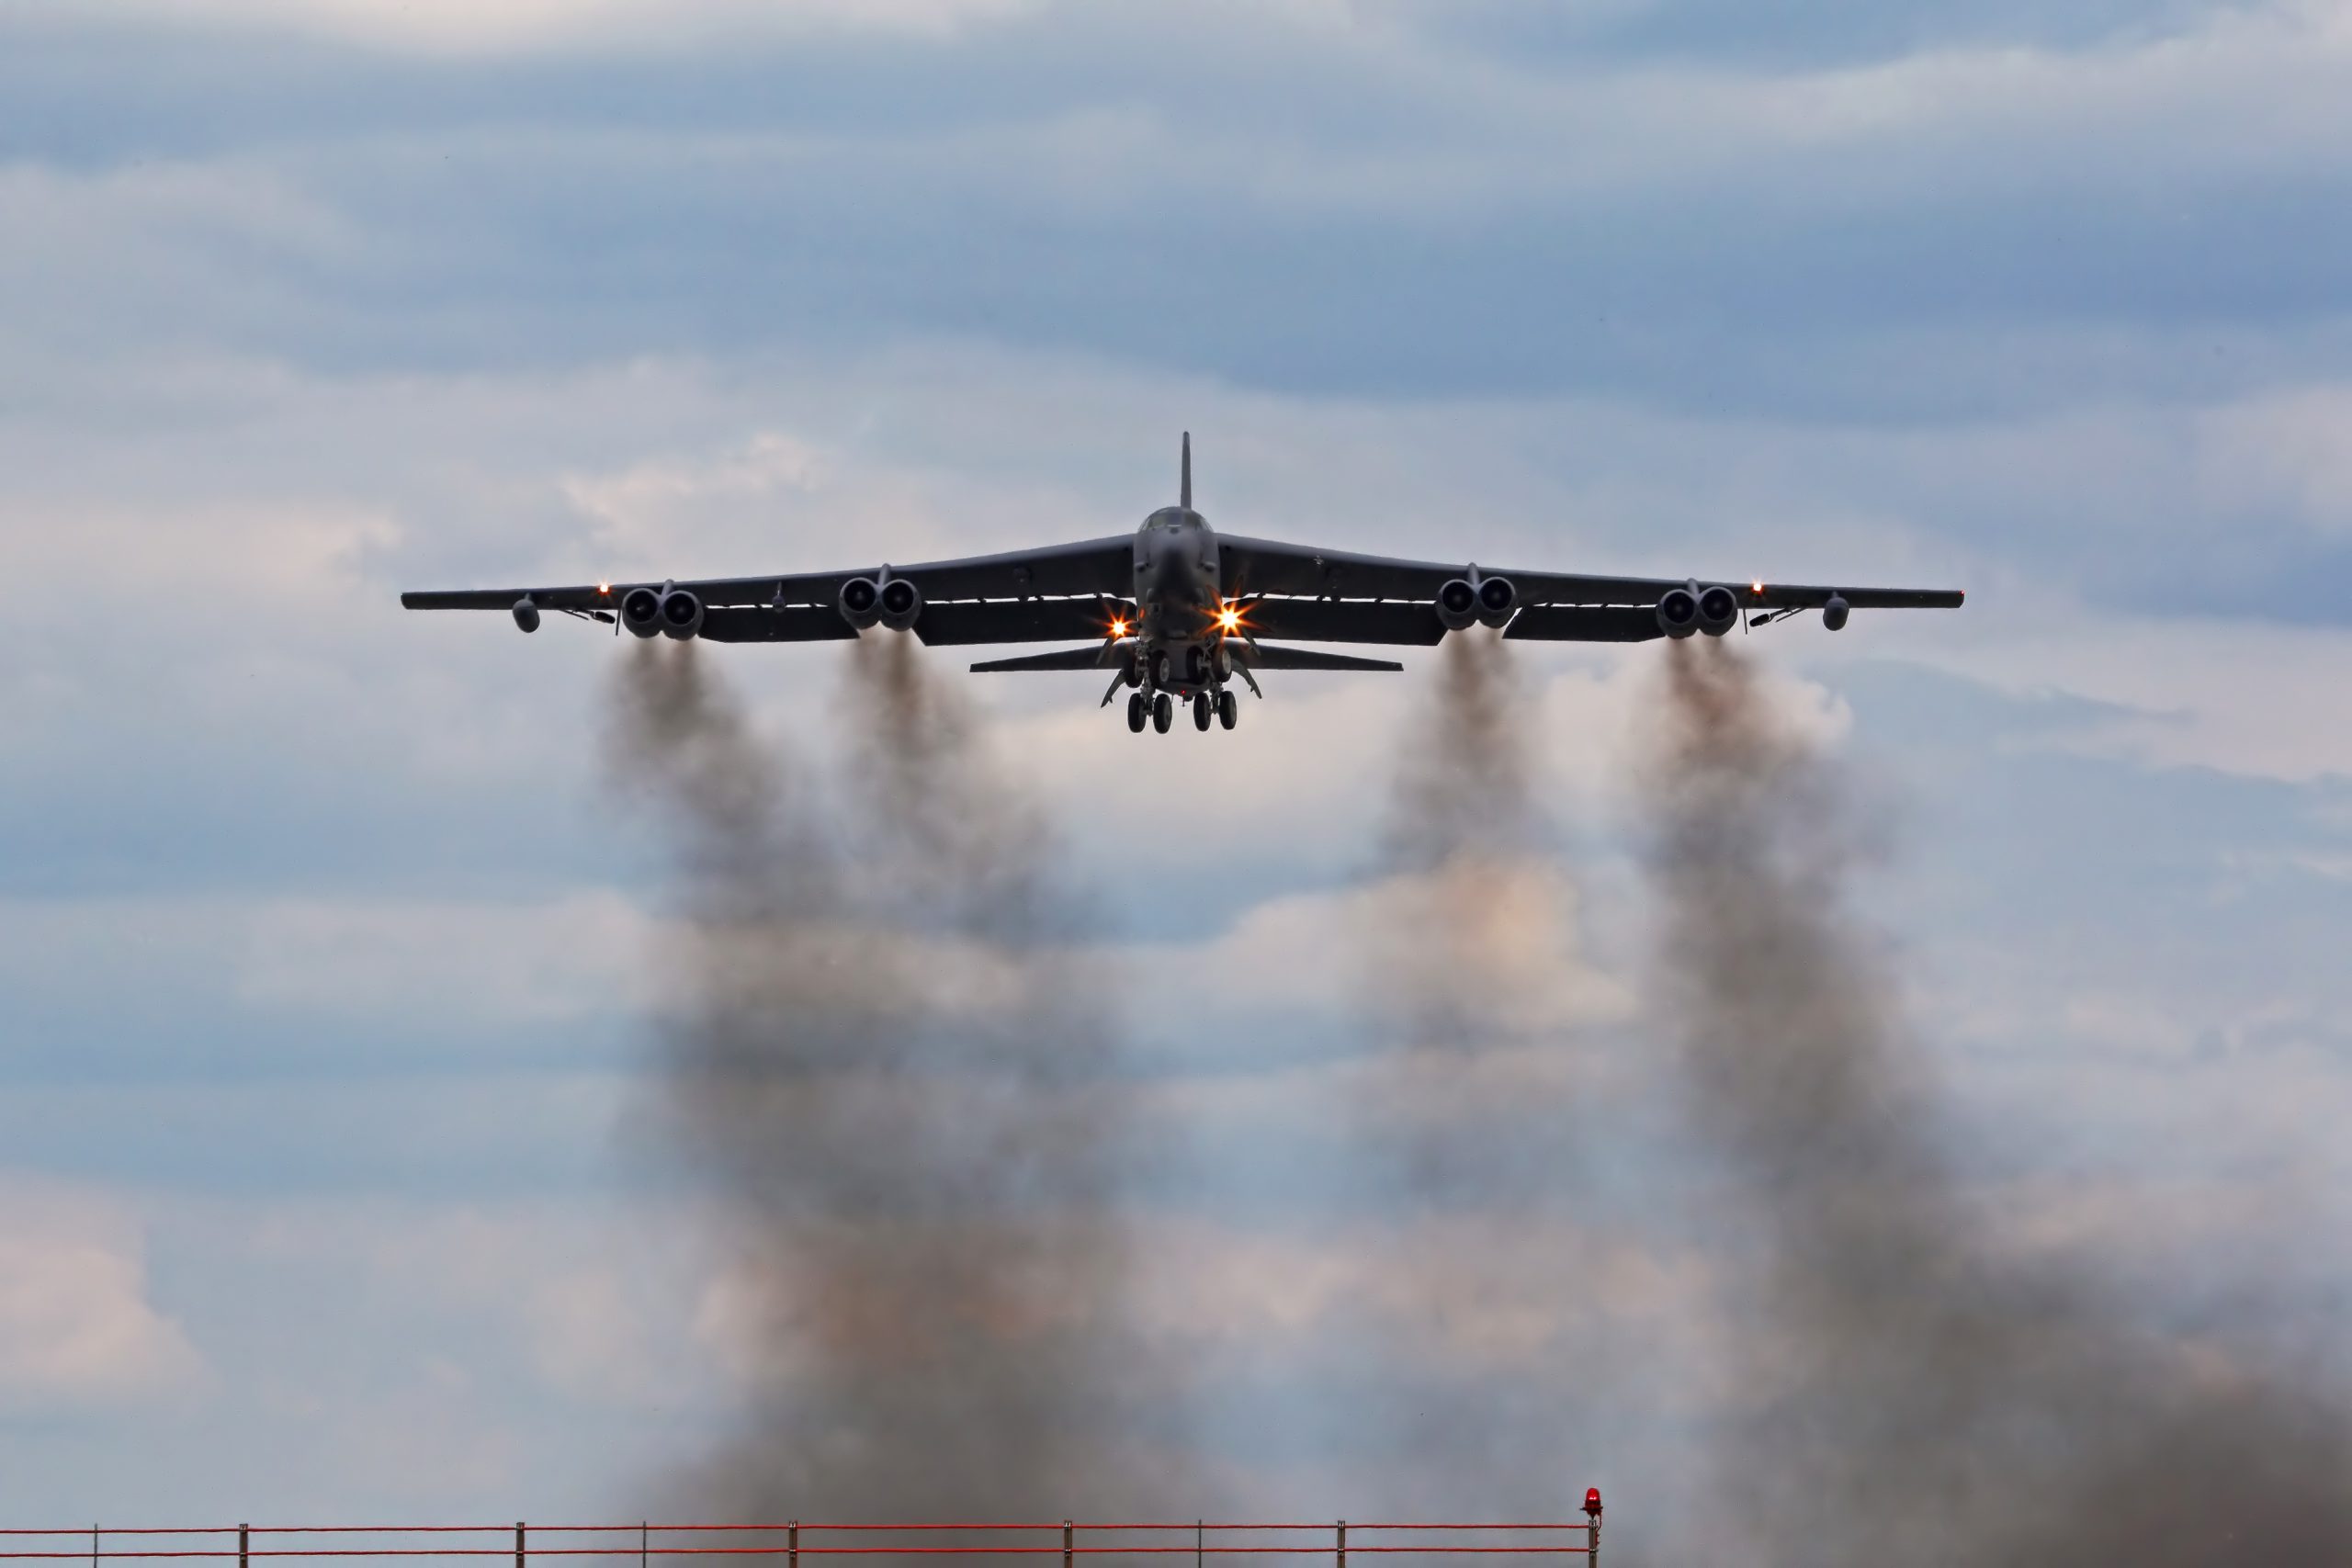 Image of a B 52 bomber taking off in Germany